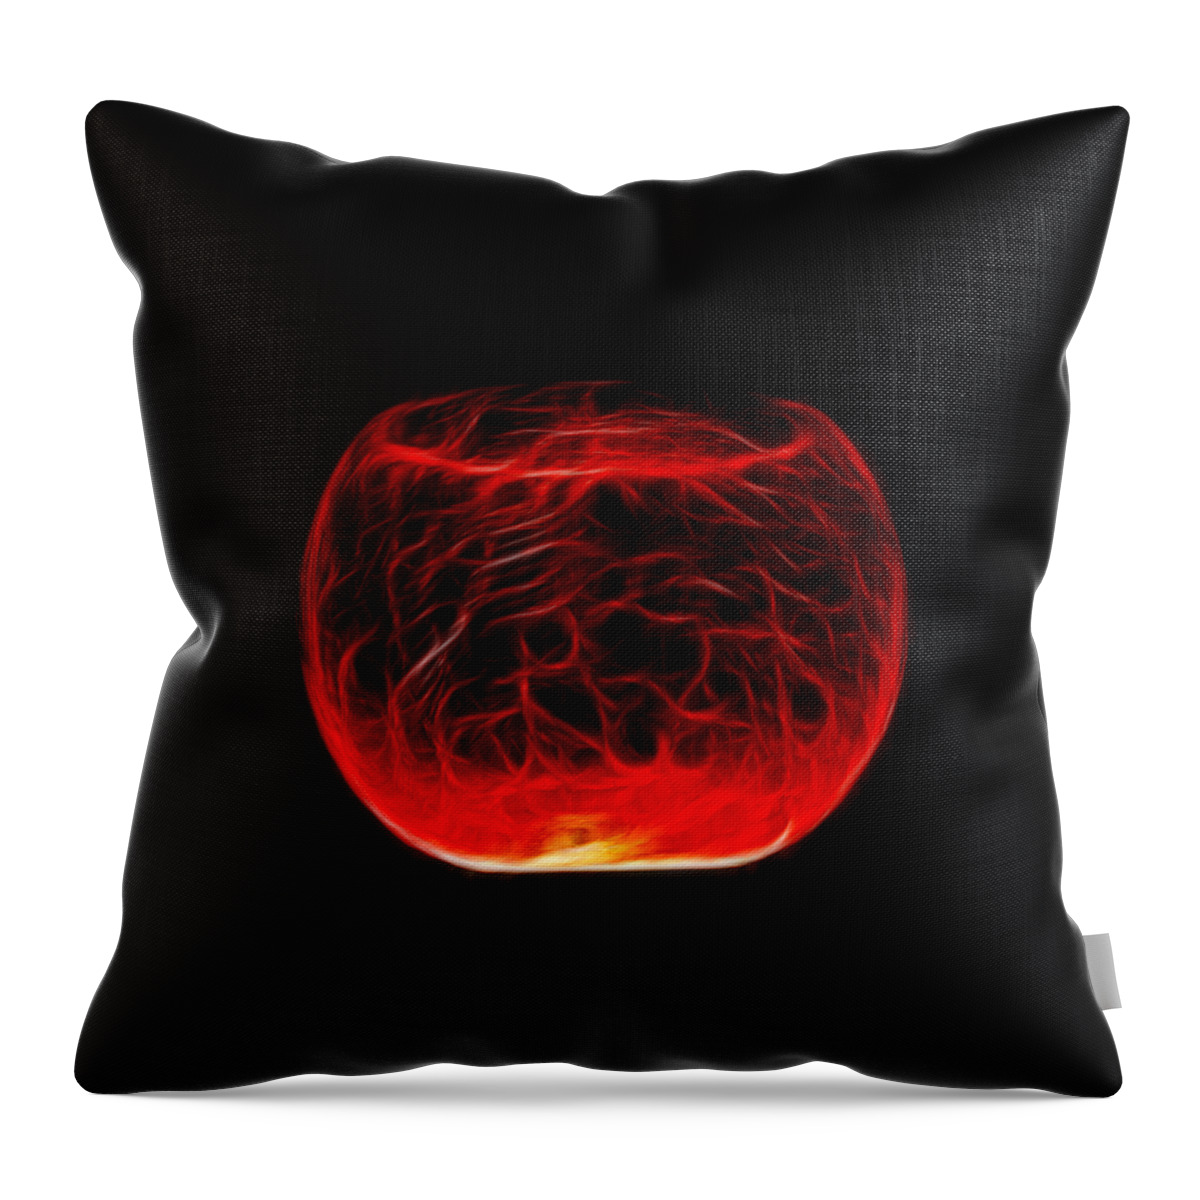 Cracked Glass Throw Pillow featuring the photograph Cracked Glass by Shane Bechler